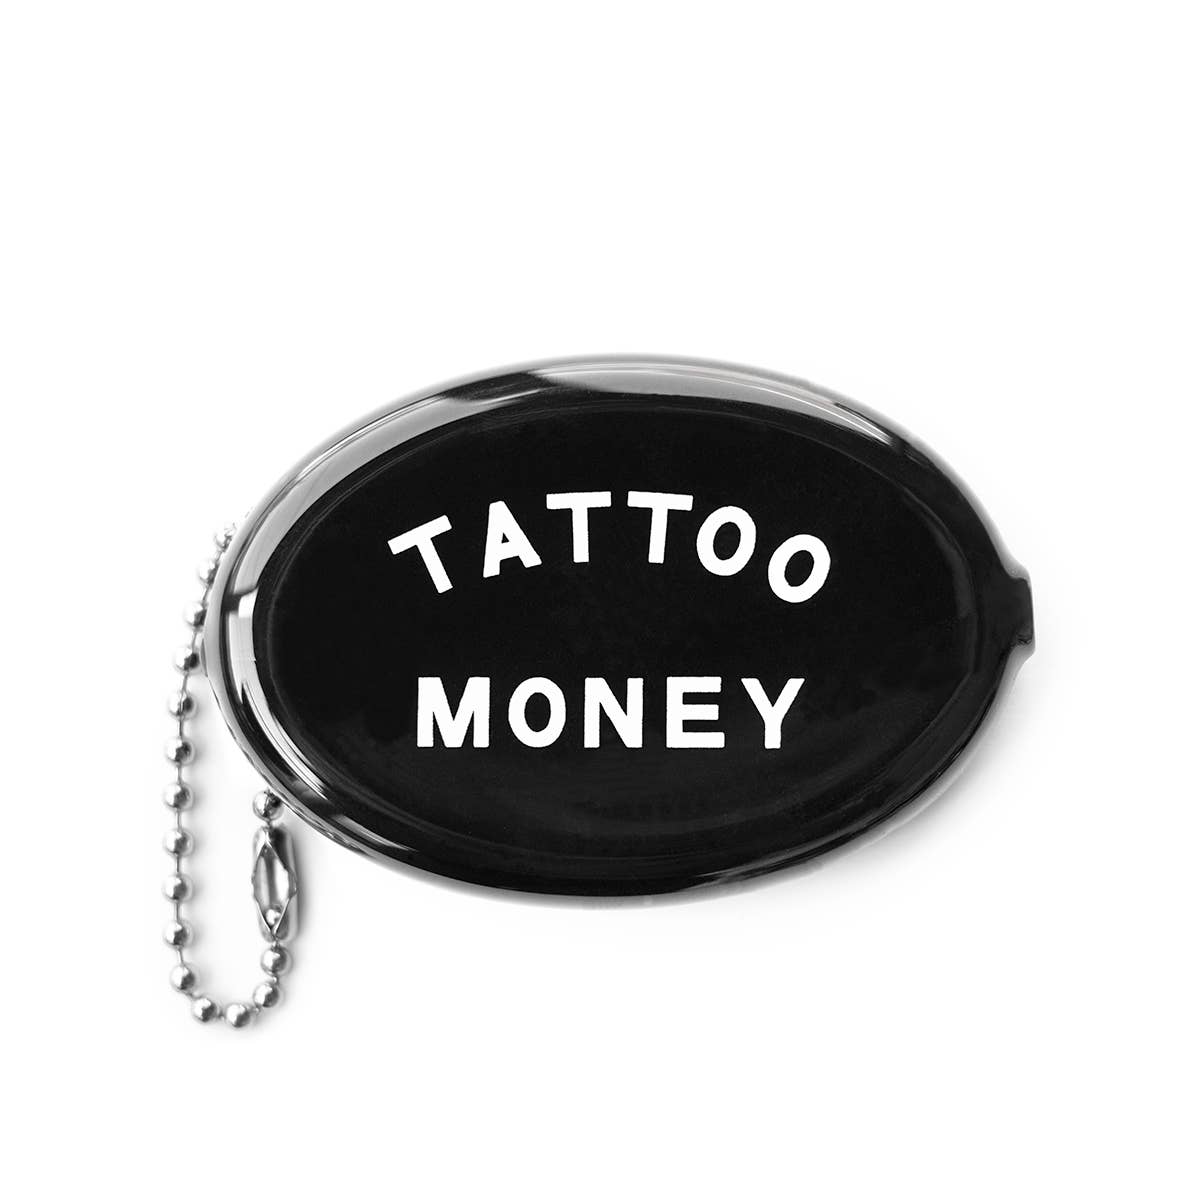 Coin Pouch - Tattoo Money